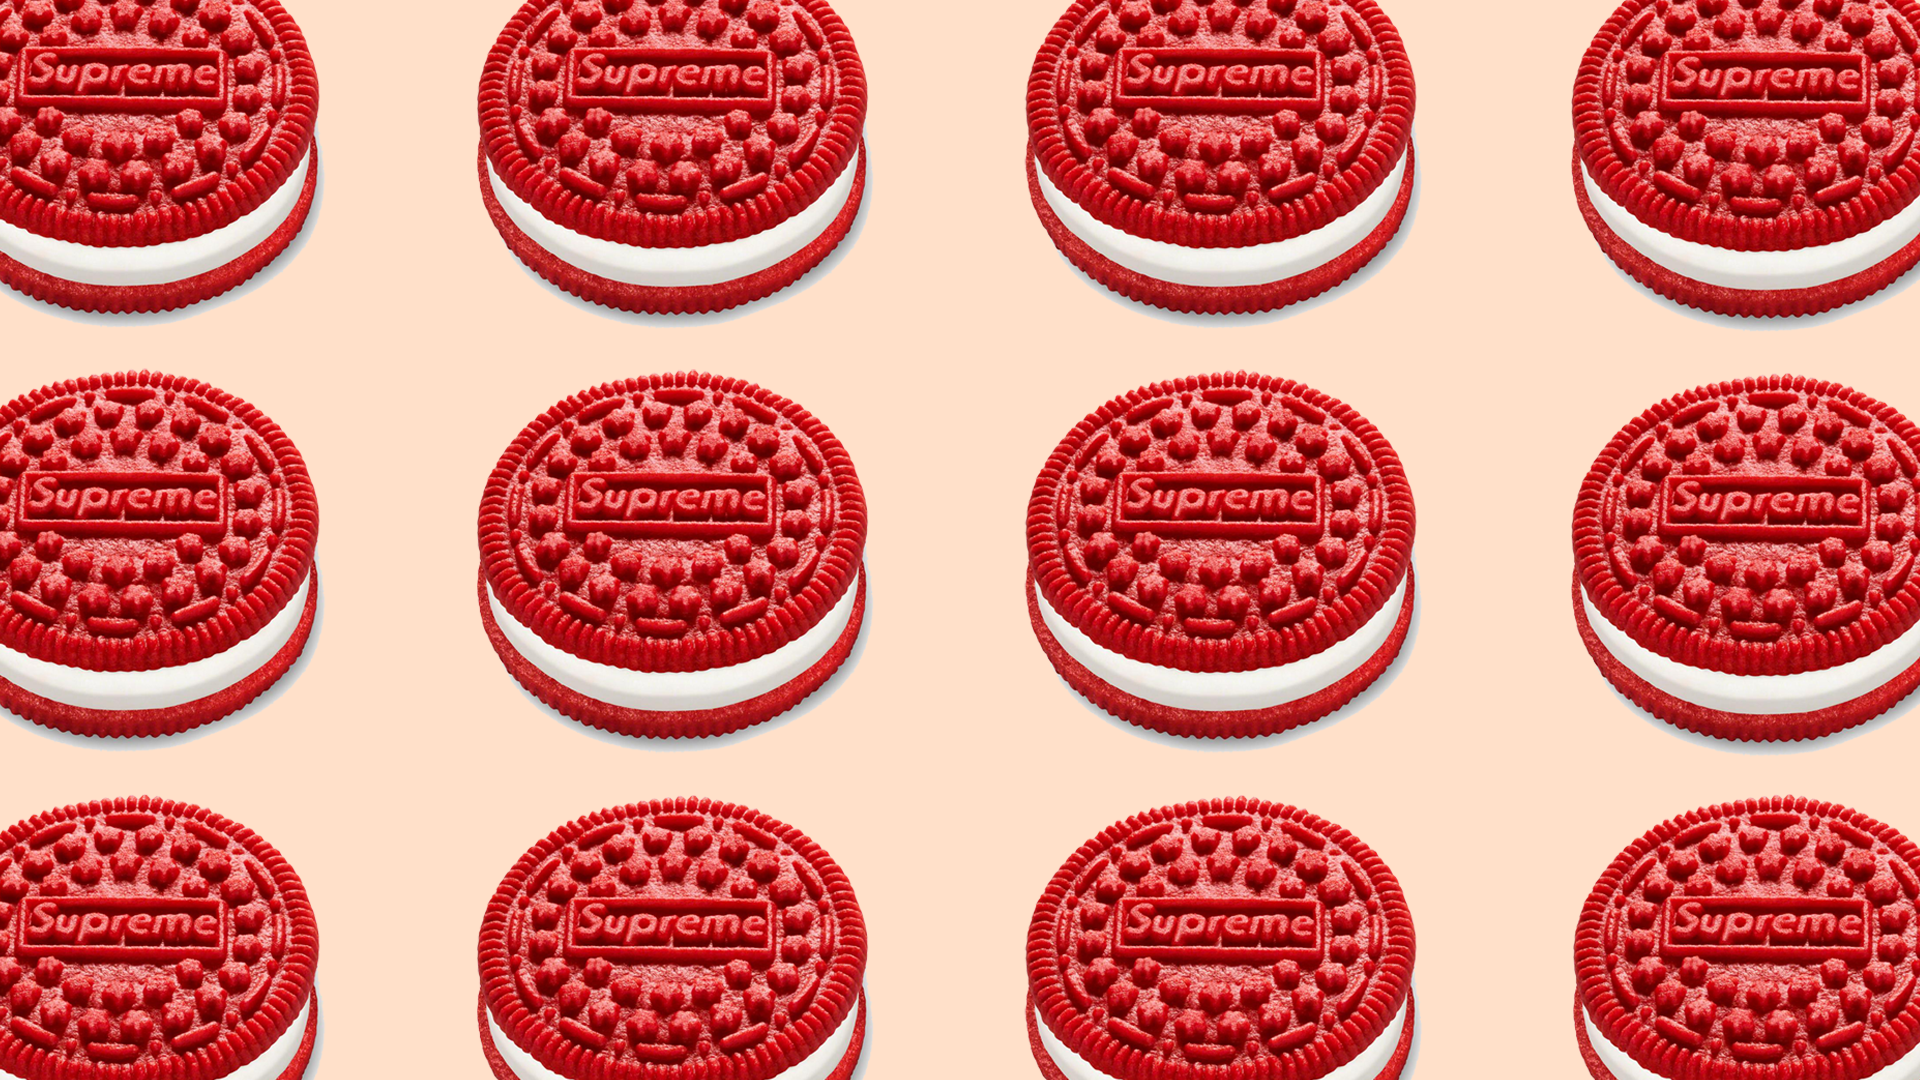 Oreo and Supreme Partner For Red Oreo Cookie